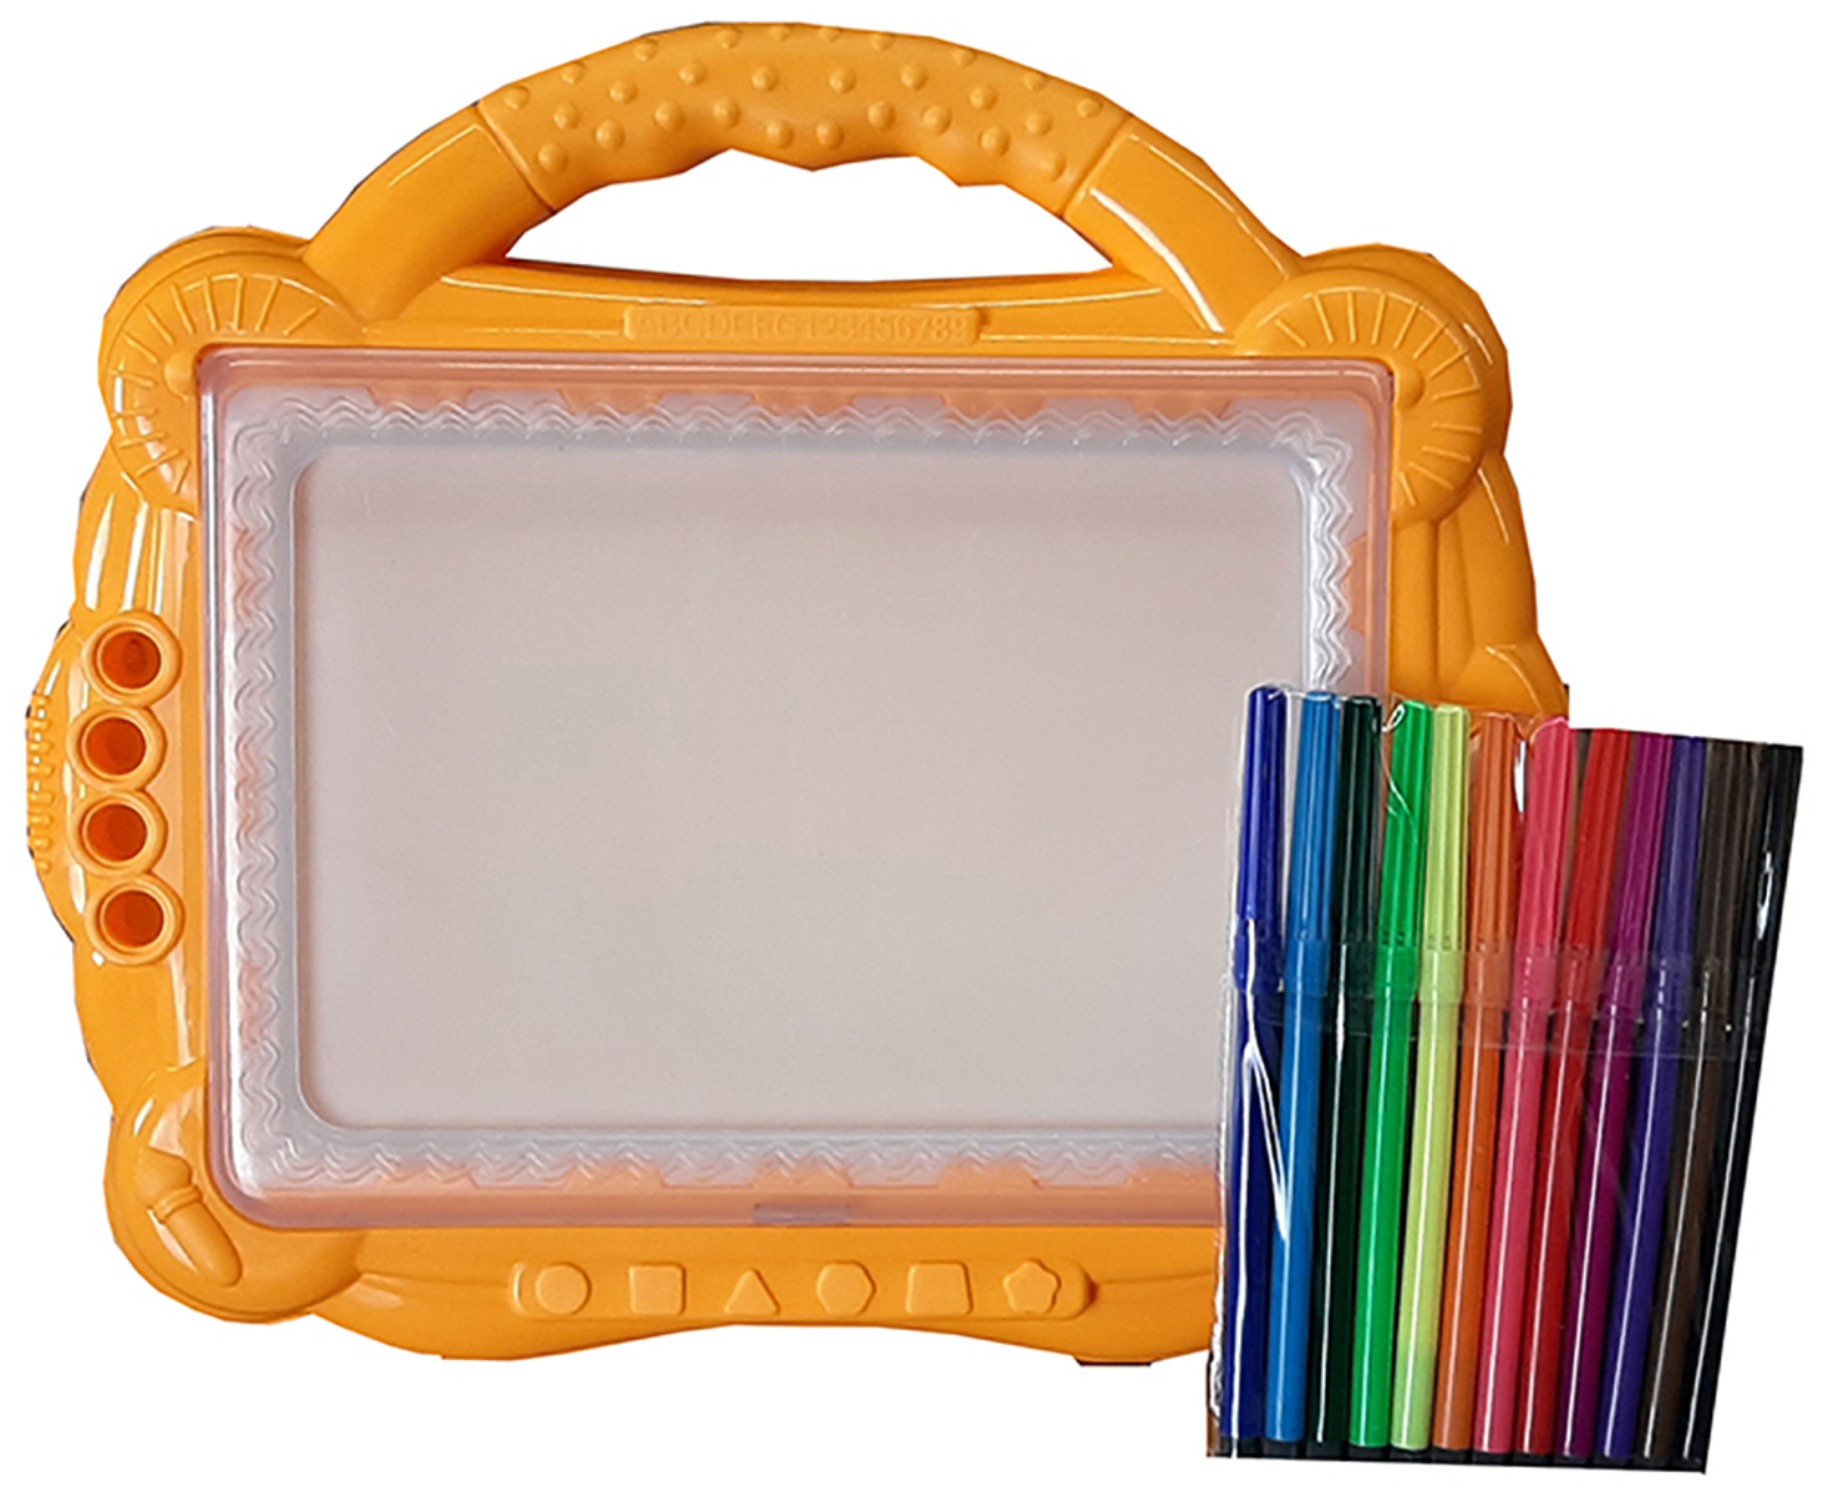 LED Light Up Drawing Board Educational Toy – LED sparkle store